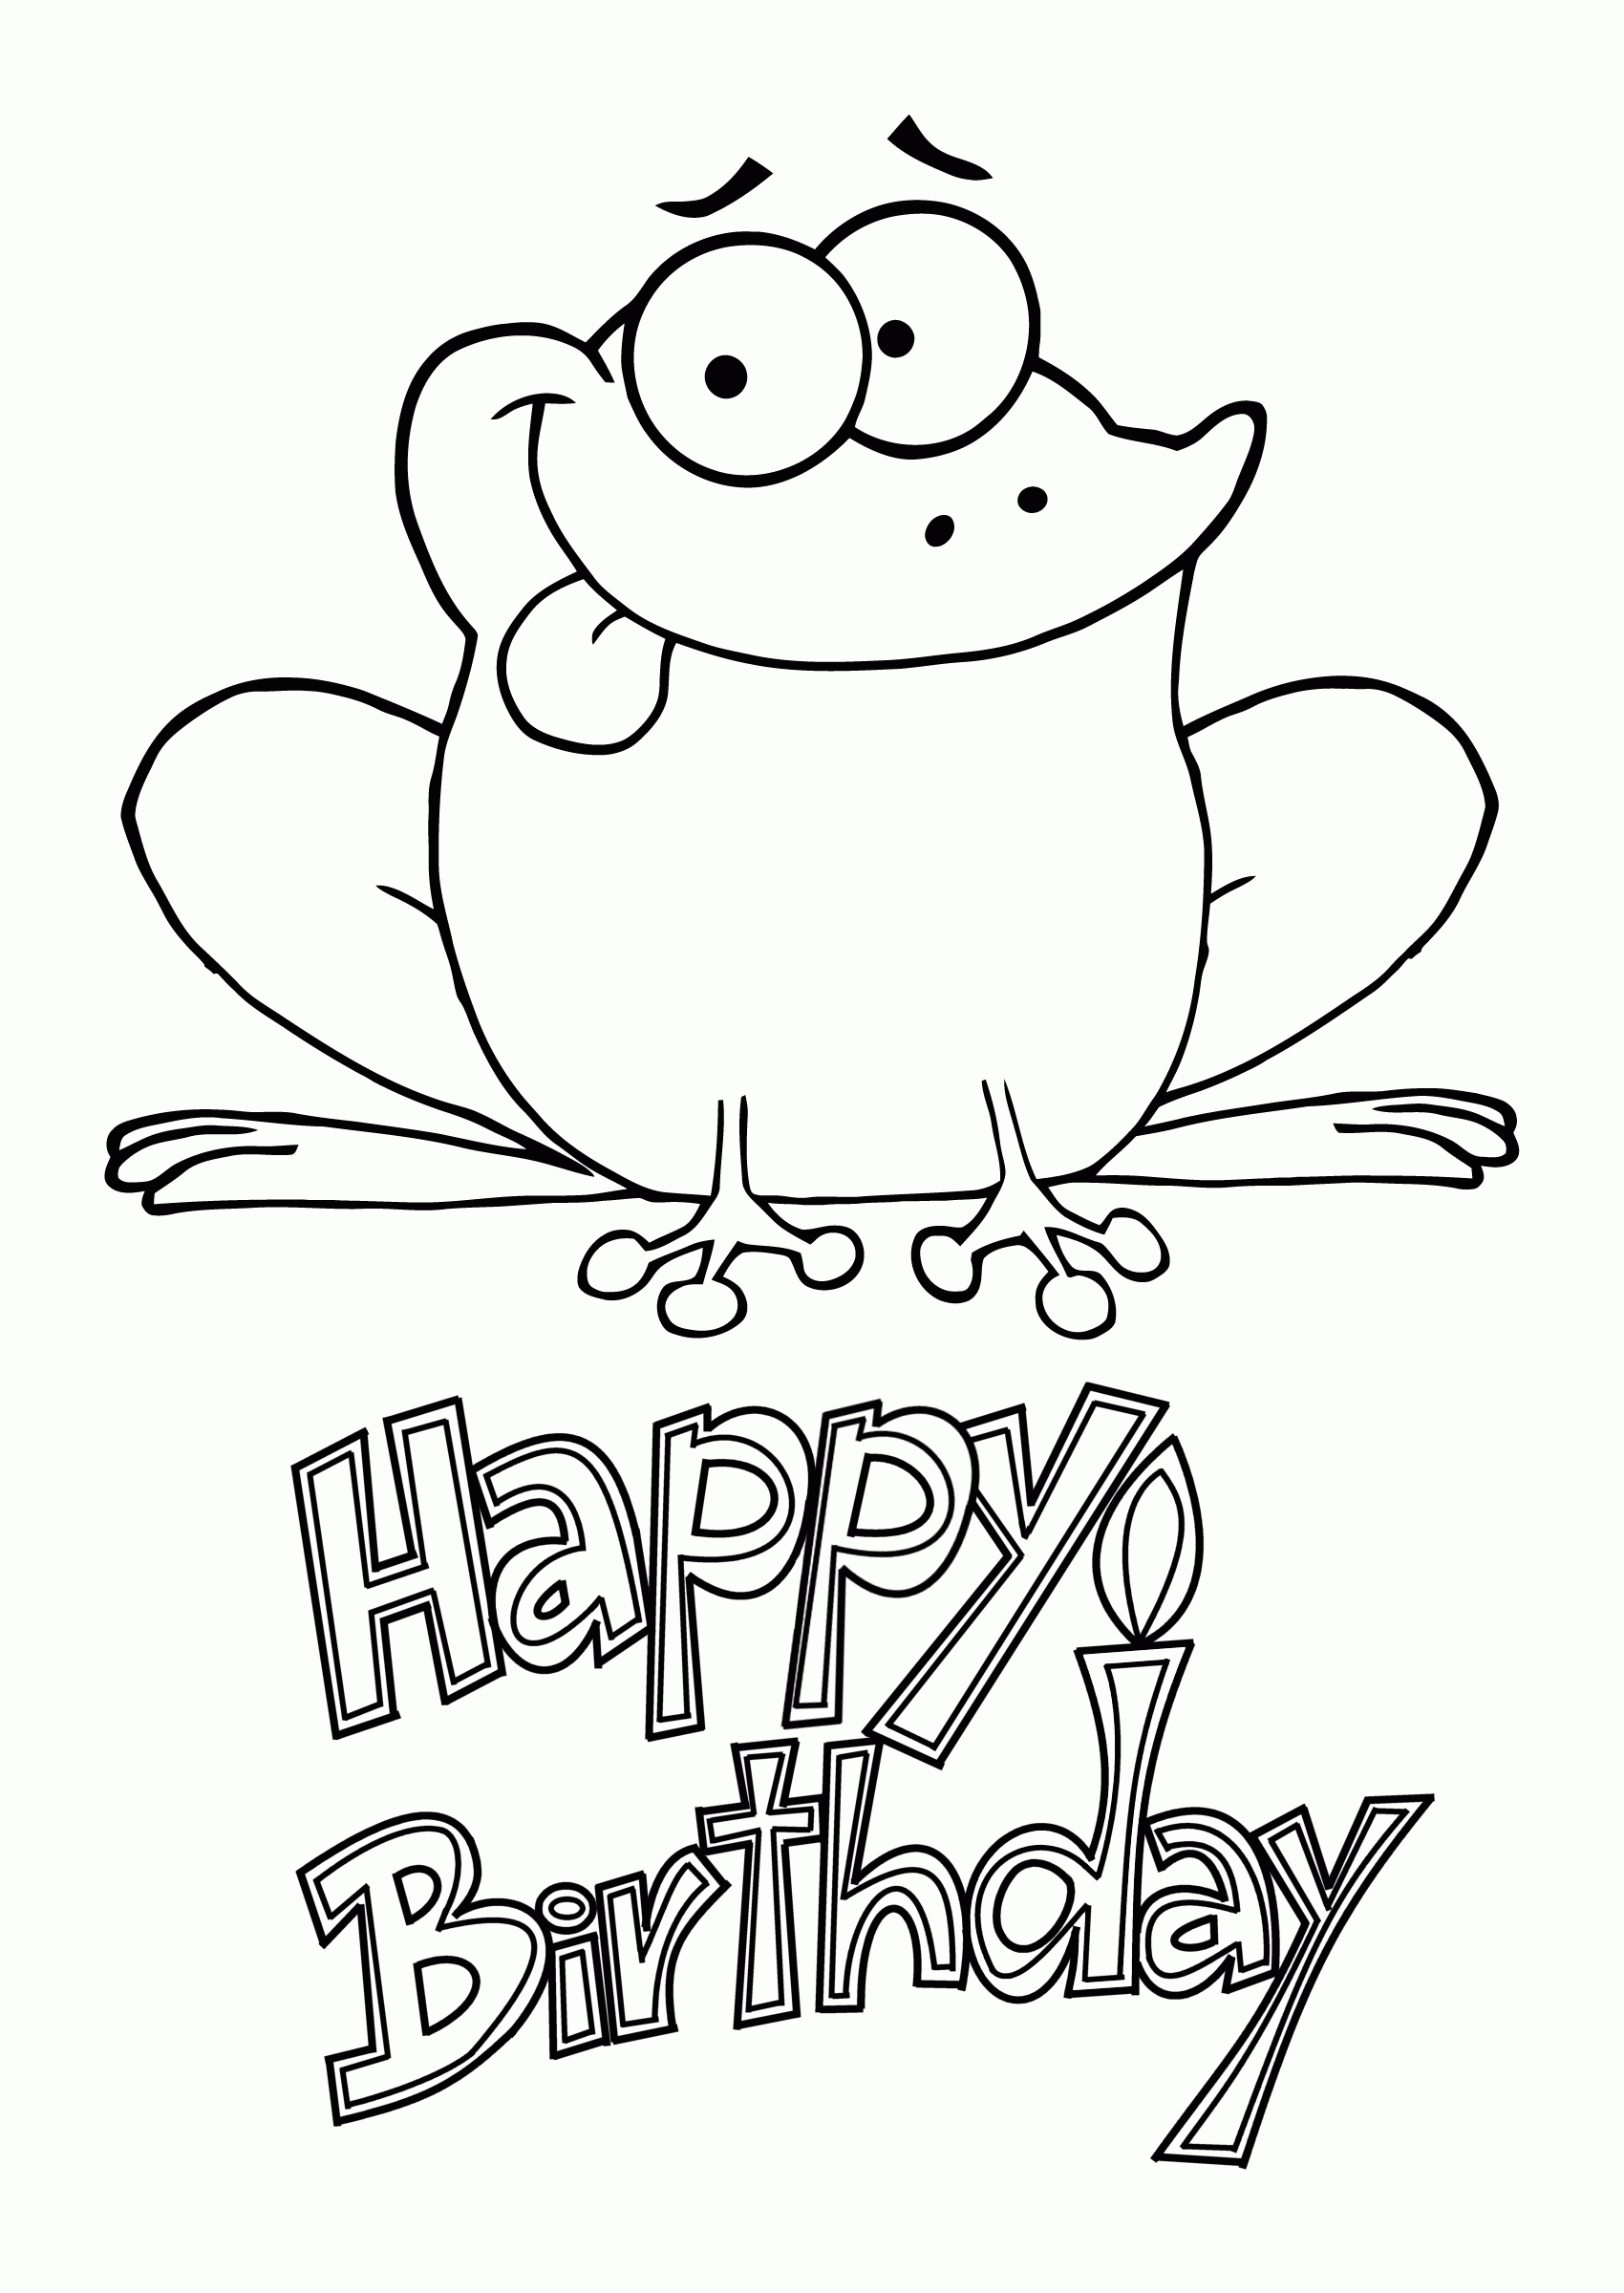 Happy Birthday Coloring Page With Frog